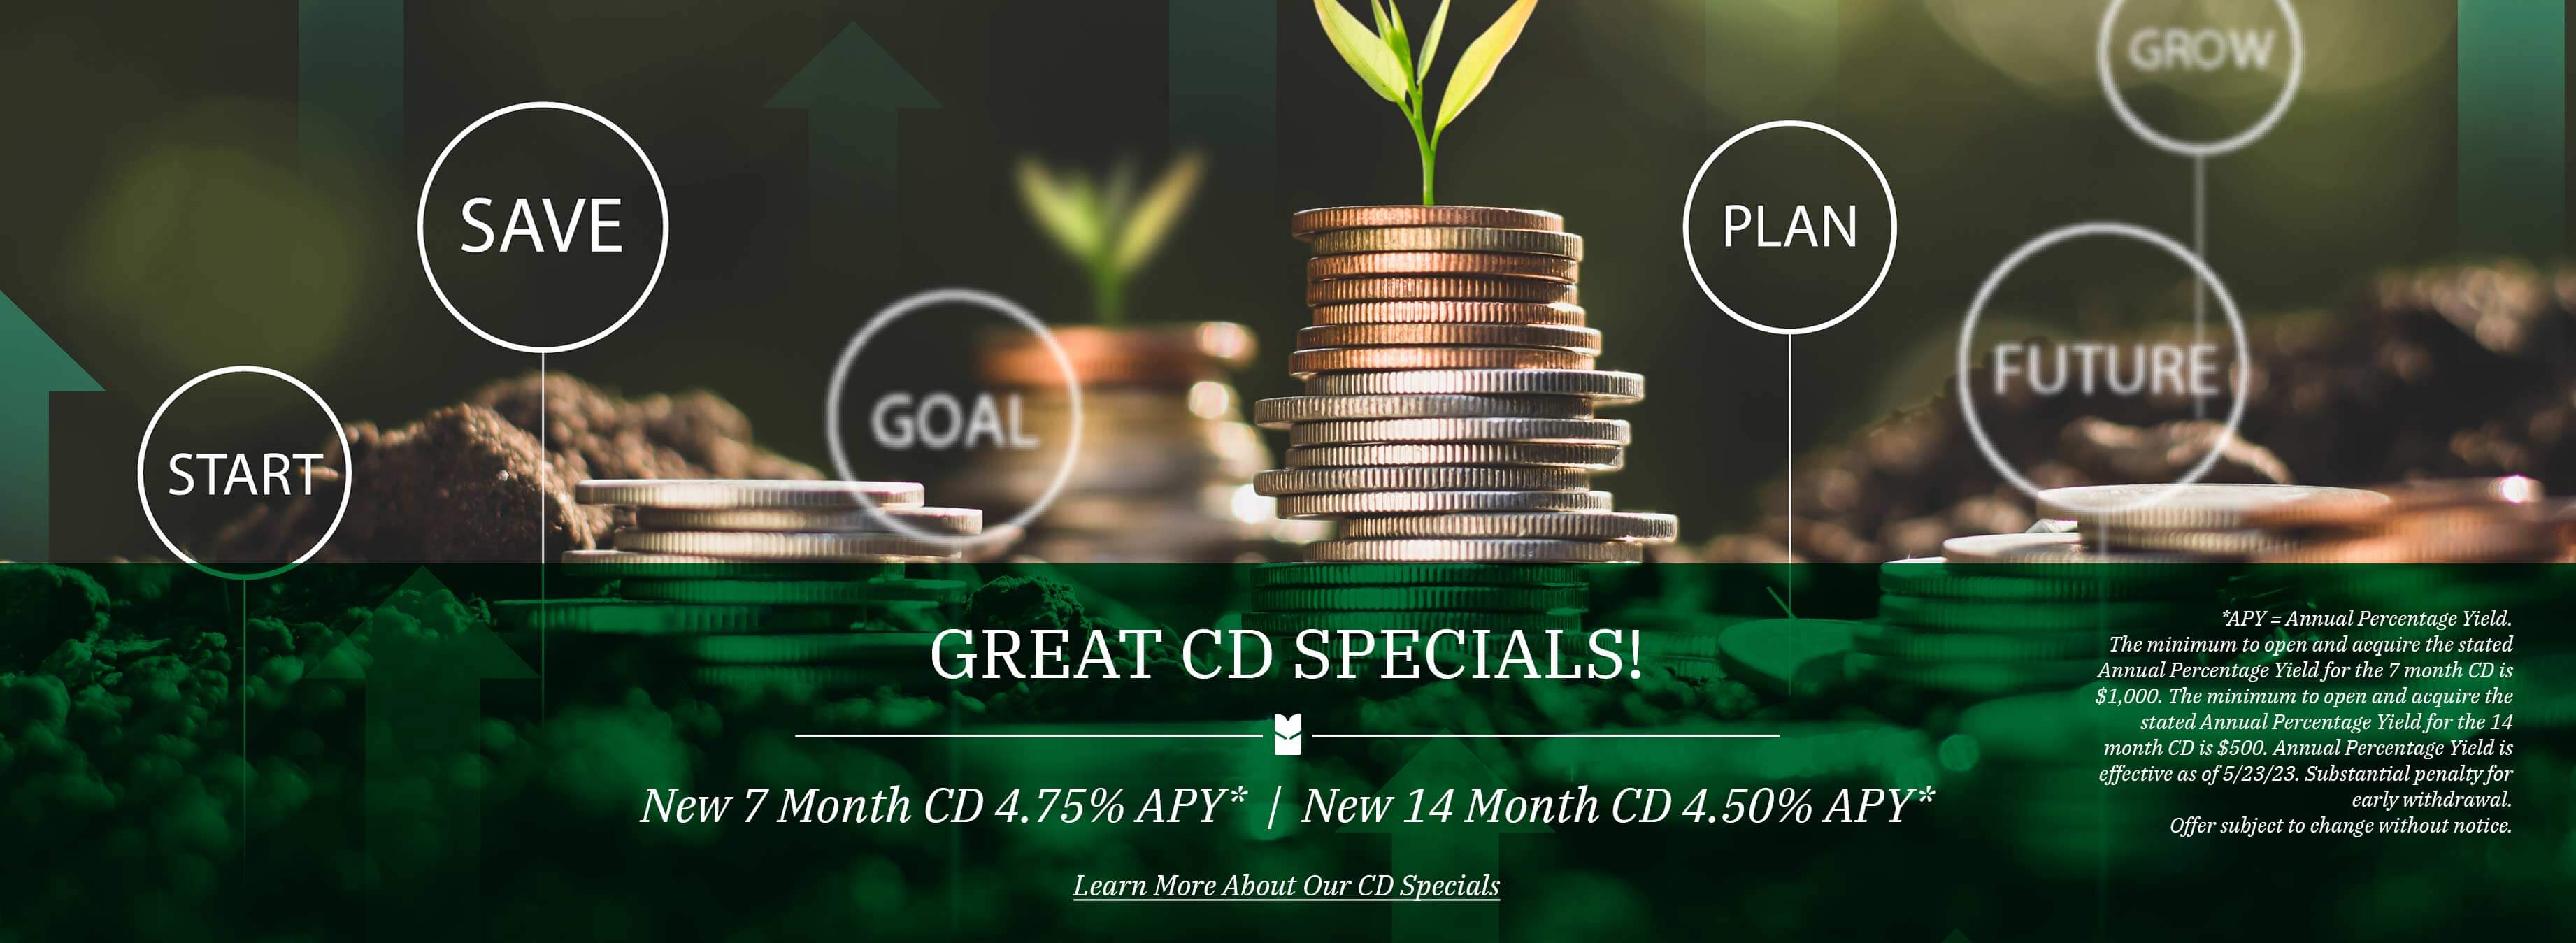 Great CD Specials! New 7 Month CD 4.75% APY. New 14 Month CD 4.50% APY. Learn more about our CD specials. *APY = Annual Percentage Yield. The minimum to open and acquire the stated Annual Percentage Yield for the 7 month CD is $1,000. The minimum to open and acquire the stated Annual Percentage Yield for the 14 month CD is $500. Annual Percentage Yield is effective as of 5/23/23. Substantial penalty for early withdrawal. Offer subject to change without notice.